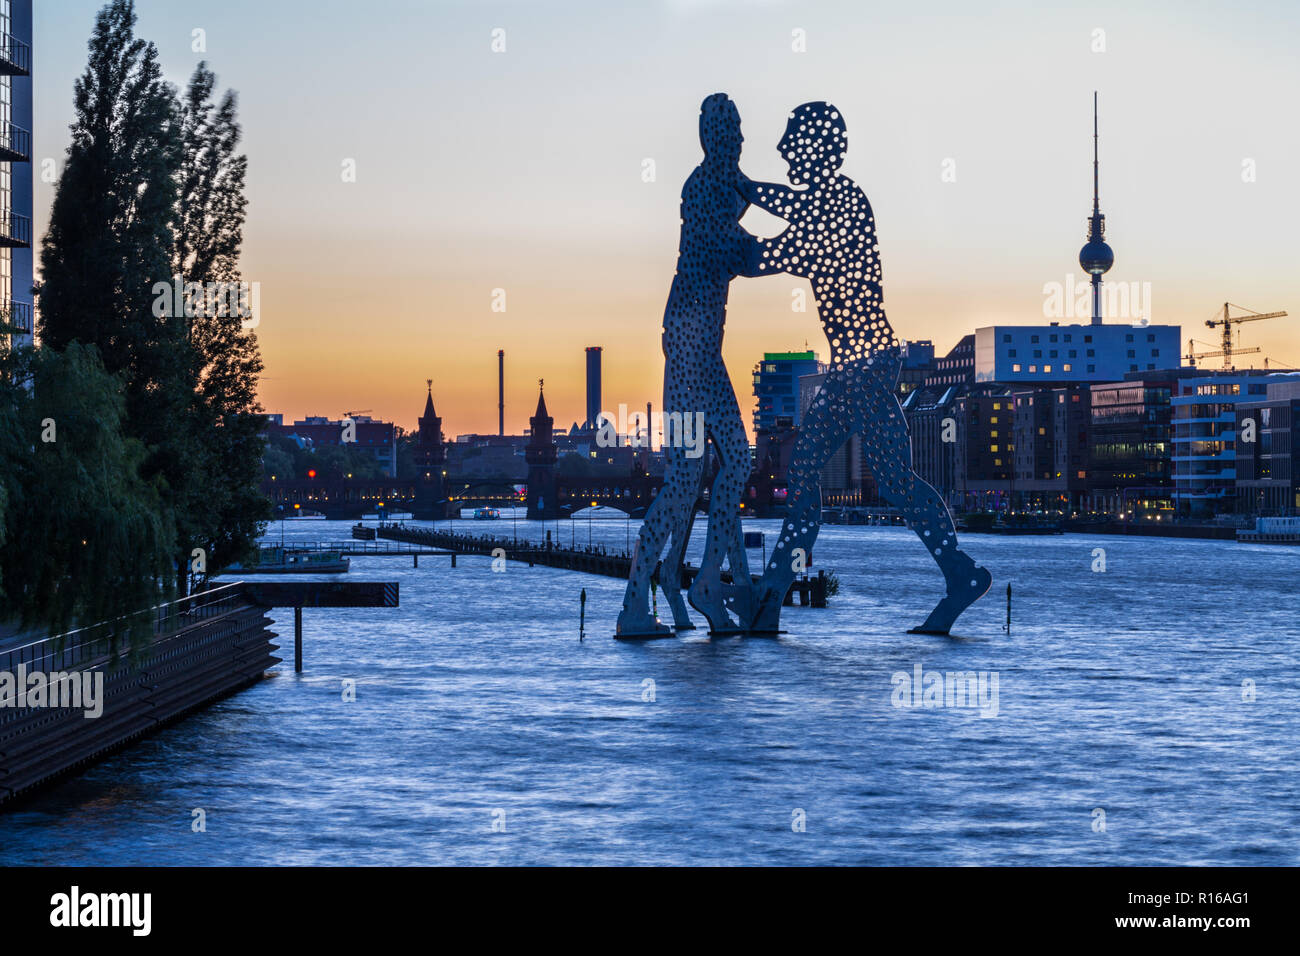 Sculpture Molecule Man by the artist Jonathan Borofsky, Spree, at the back Oberbaum Bridge and television tower Alexanderplatz Stock Photo